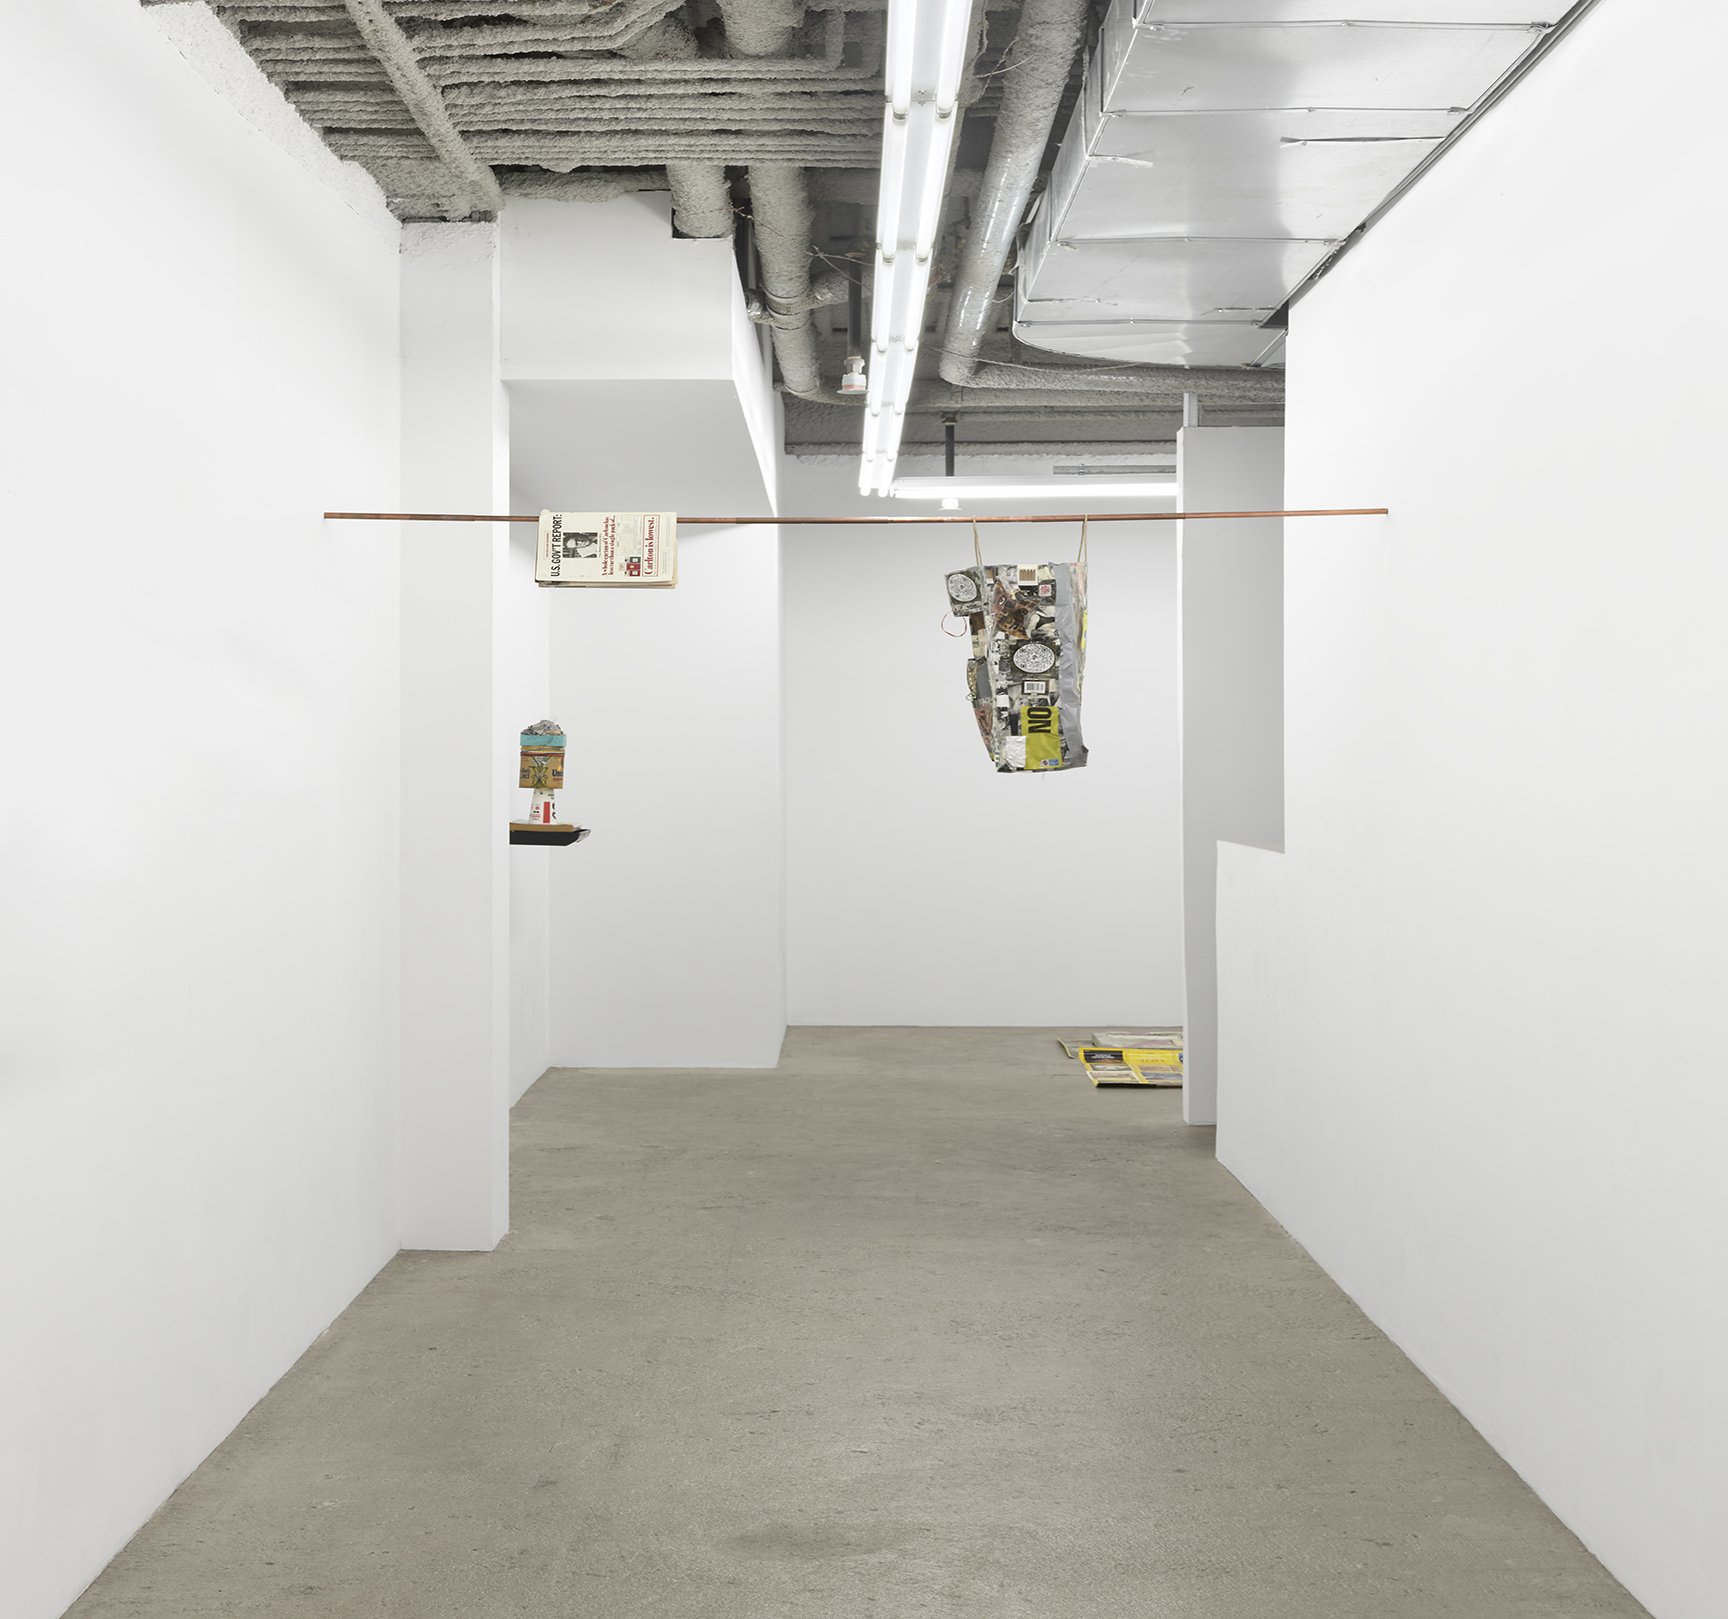  Elzie Williams III  Politics As Usual  installation view, middle gallery 